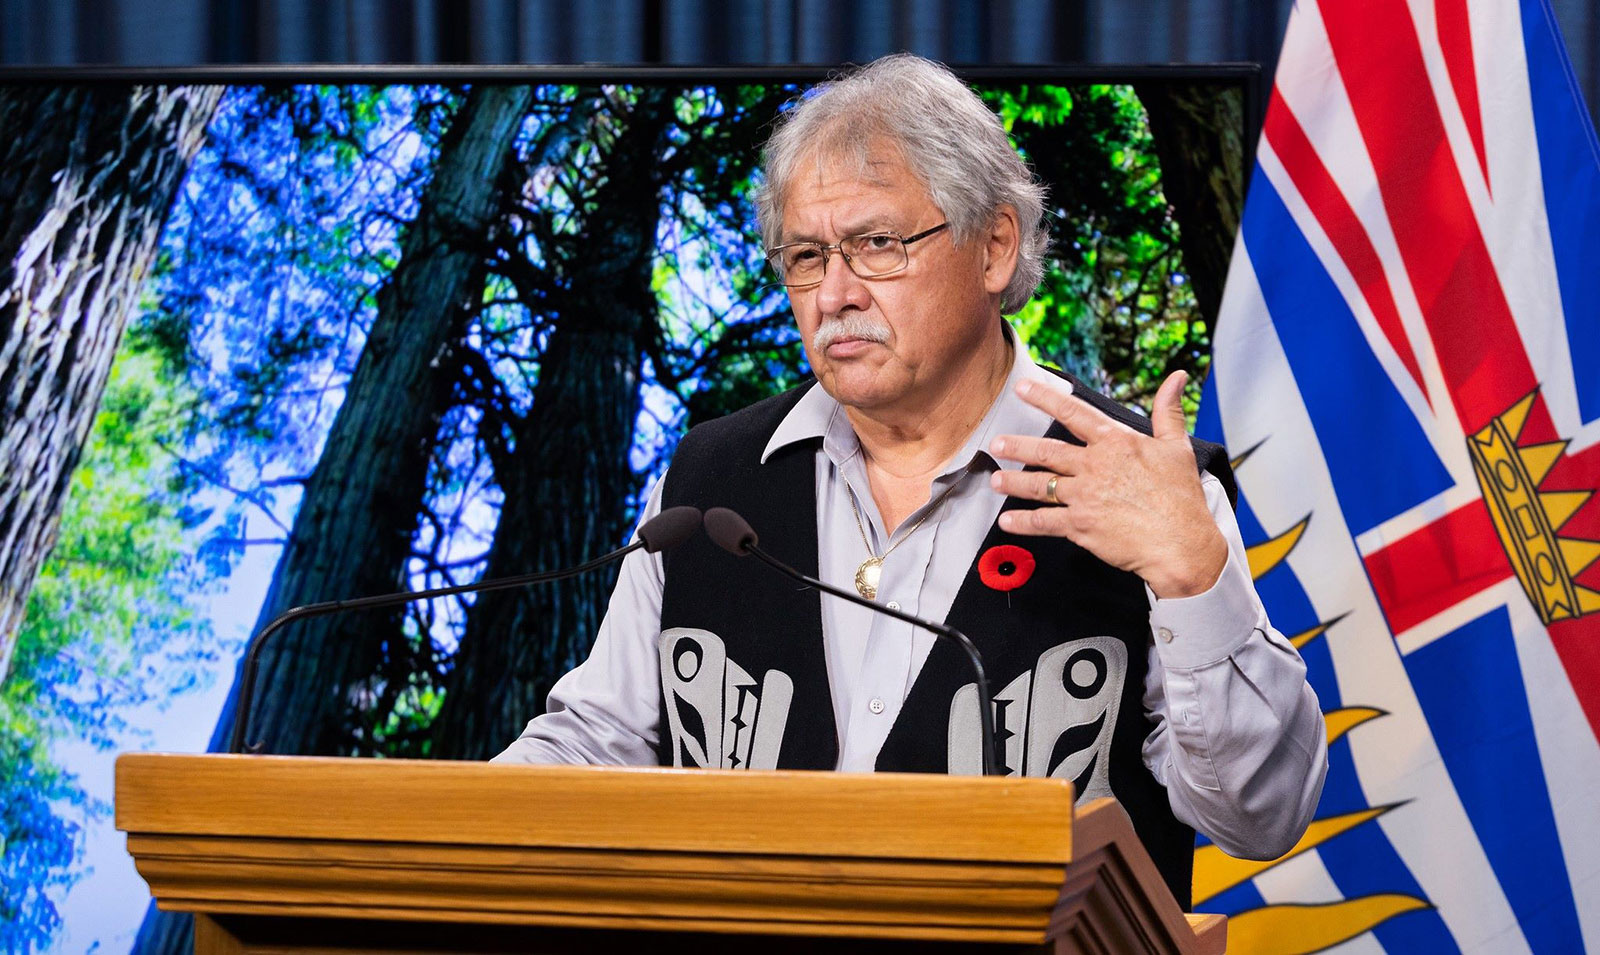 A silver-haired, medium-skinned man wearing a vest with Indigenous designs gestures from a podium.